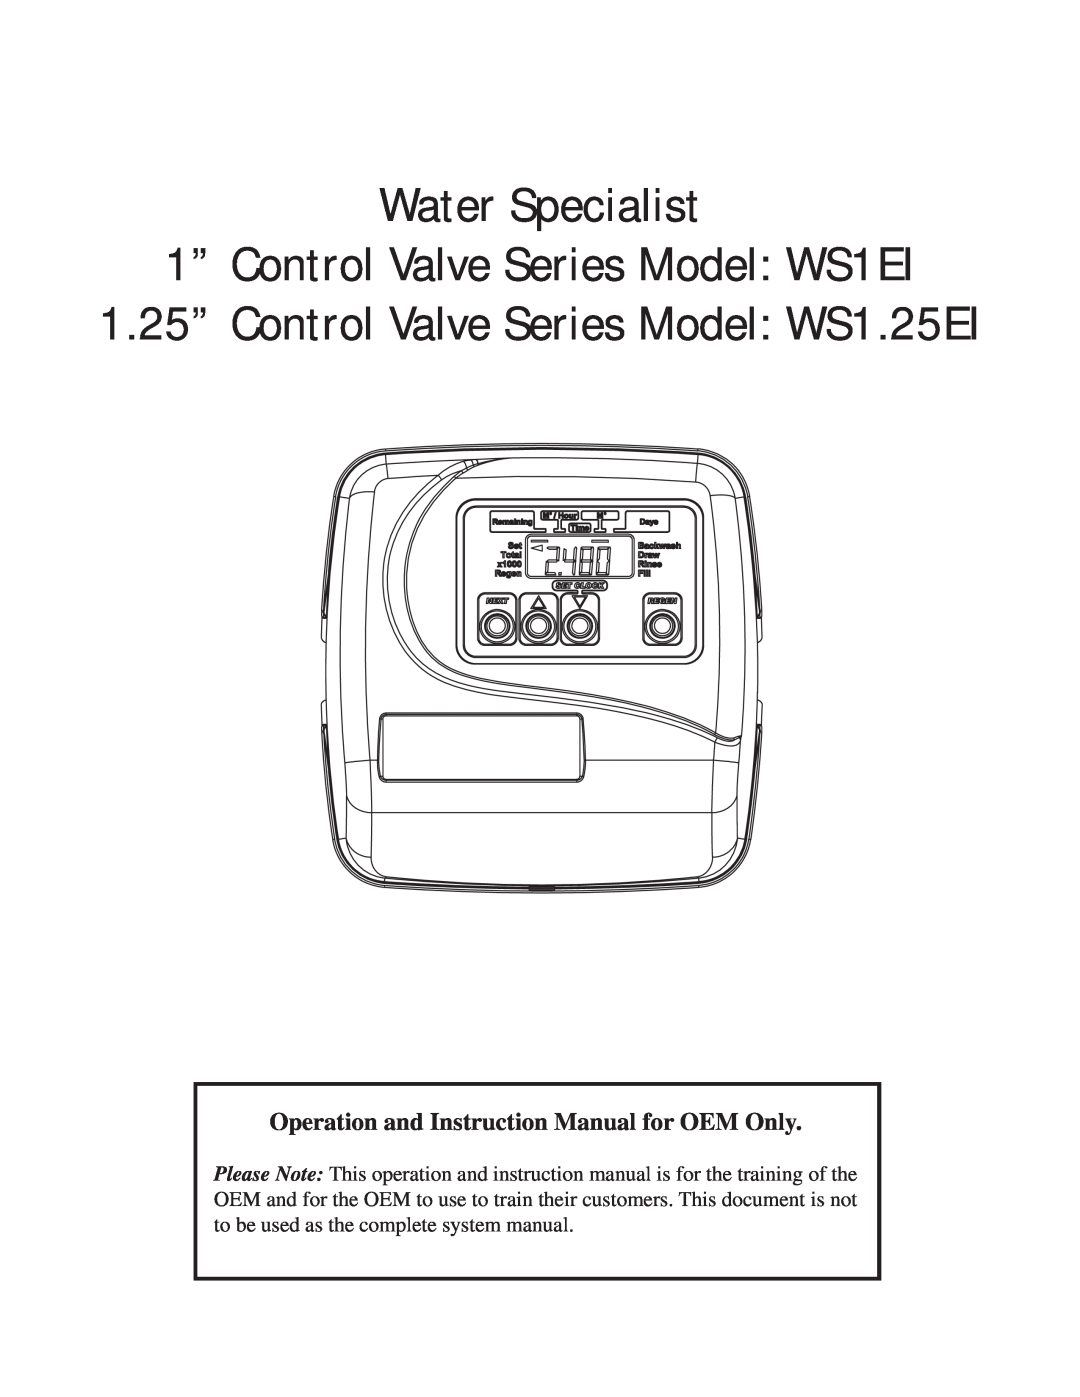 OEM Systems WS1.25EI instruction manual Water Specialist 1” Control Valve Series Model WS1EI 